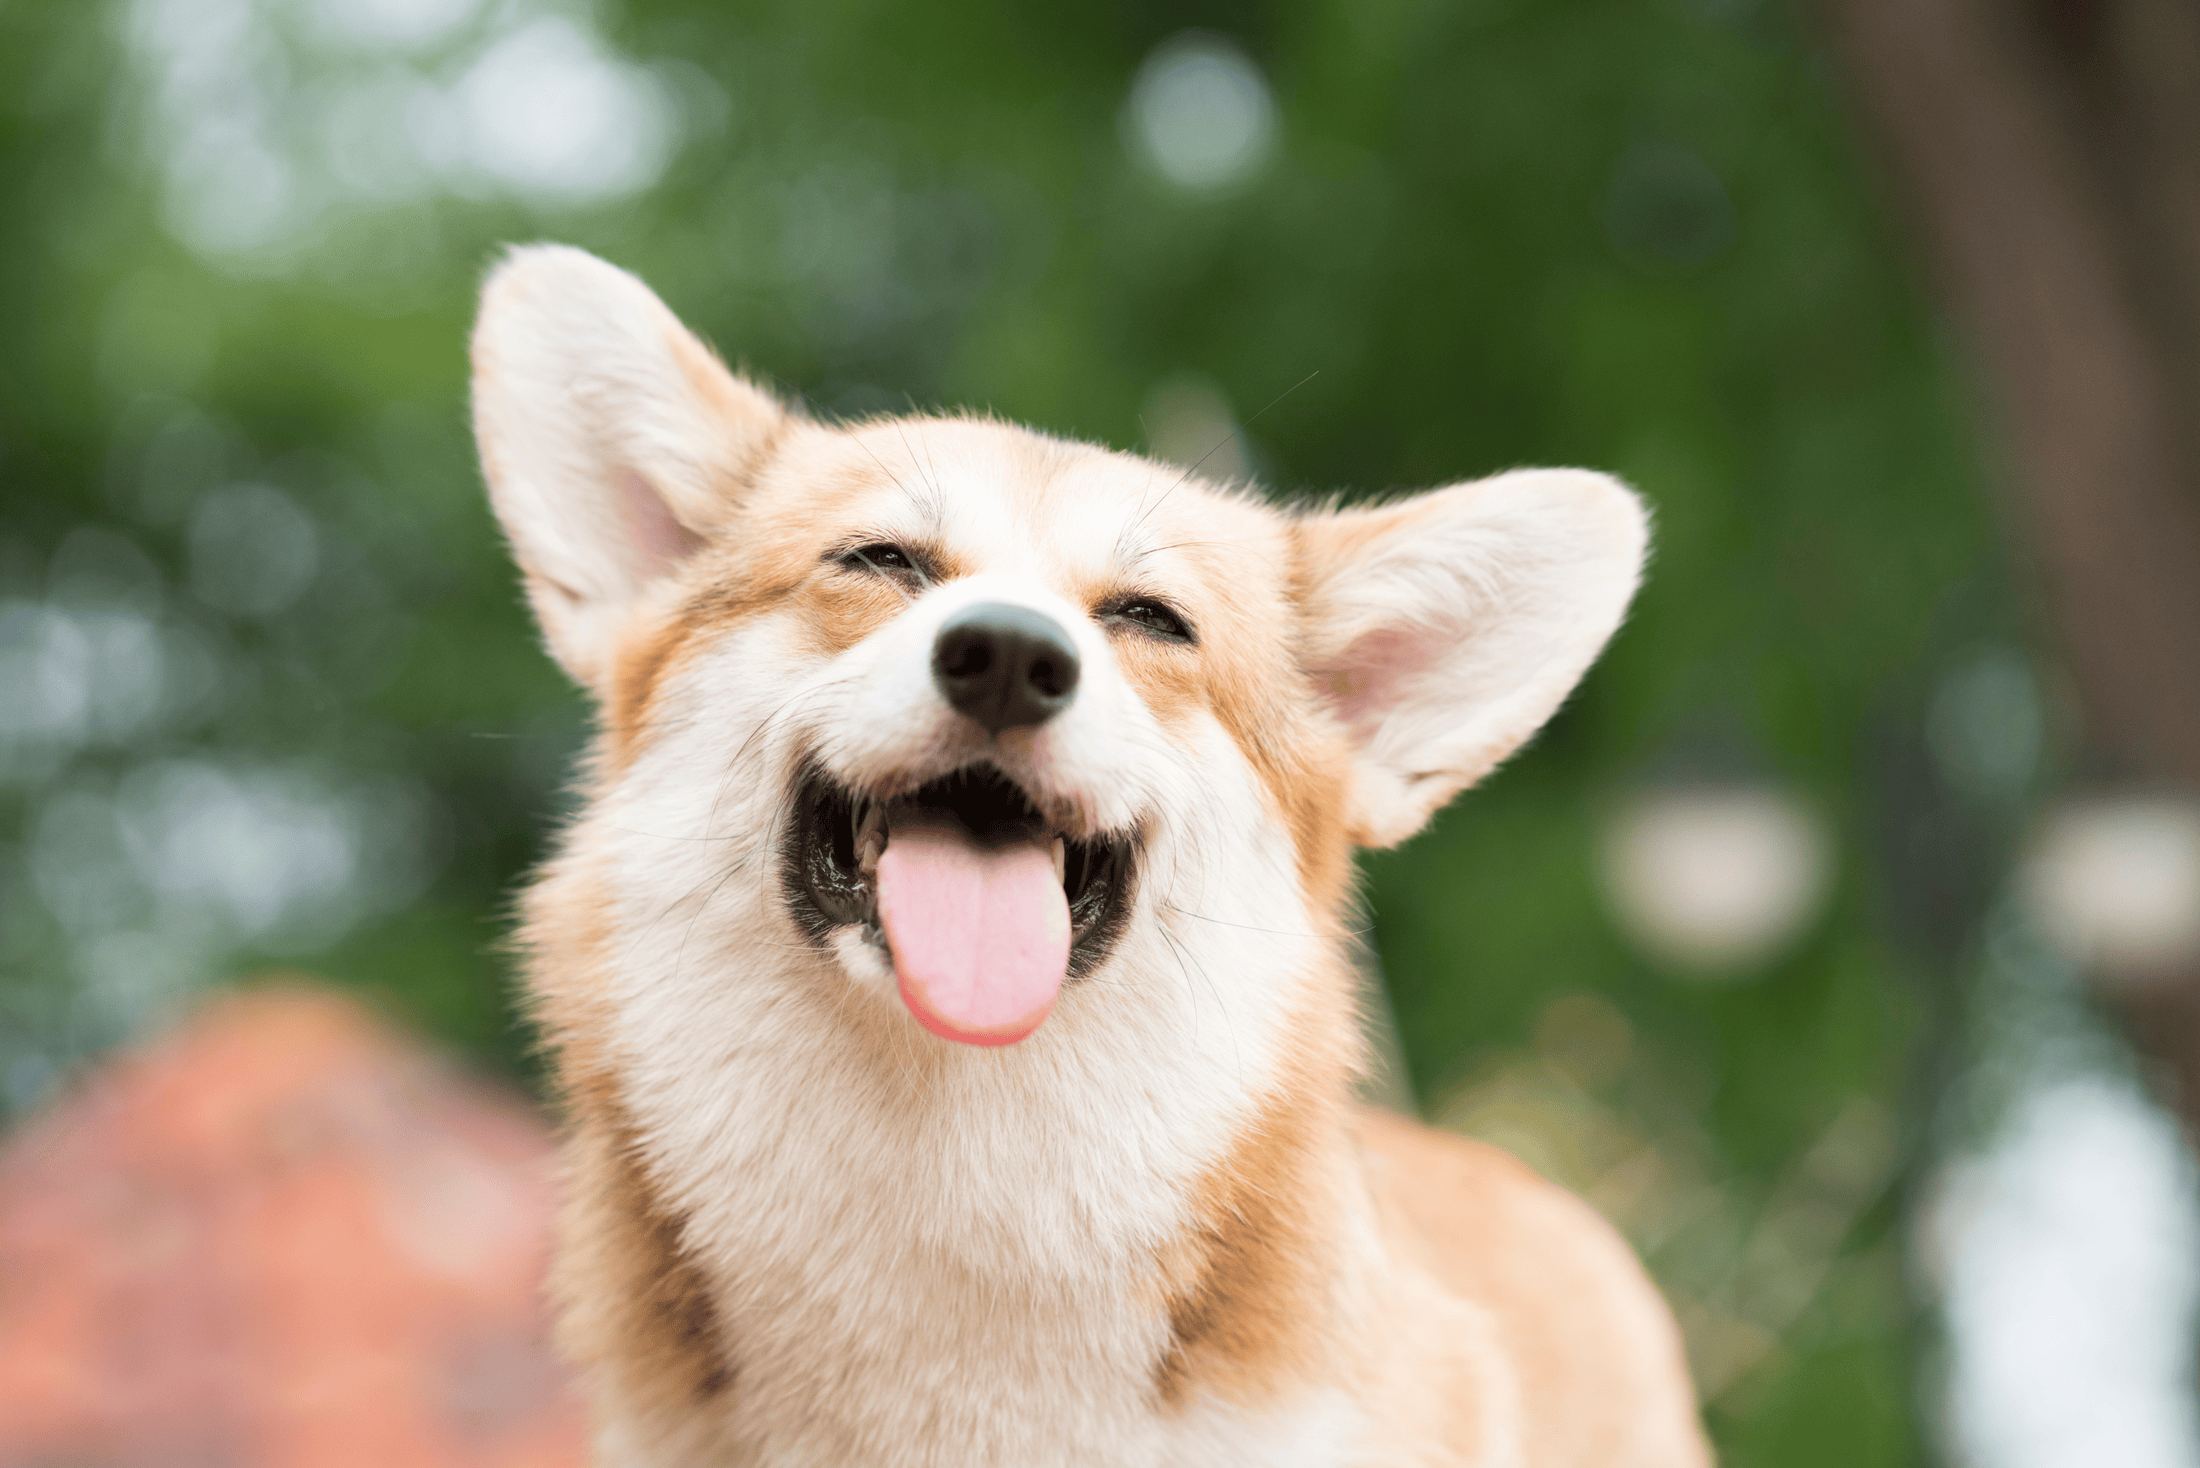 A relaxed dog is usually a very happy dog. Look for these soft, loose body language signals.